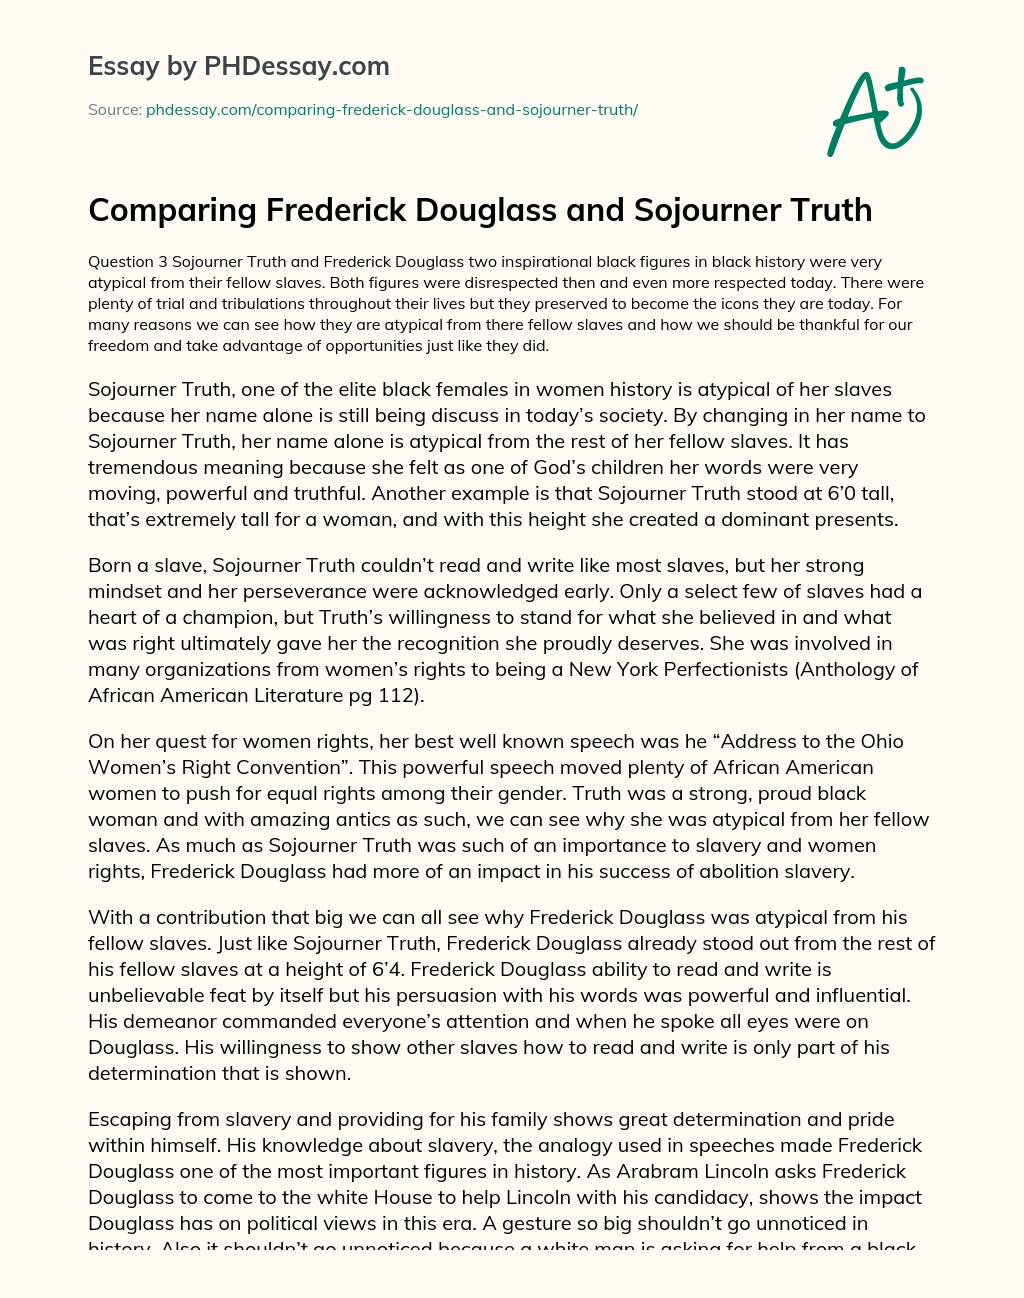 Comparing Frederick Douglass and Sojourner Truth essay